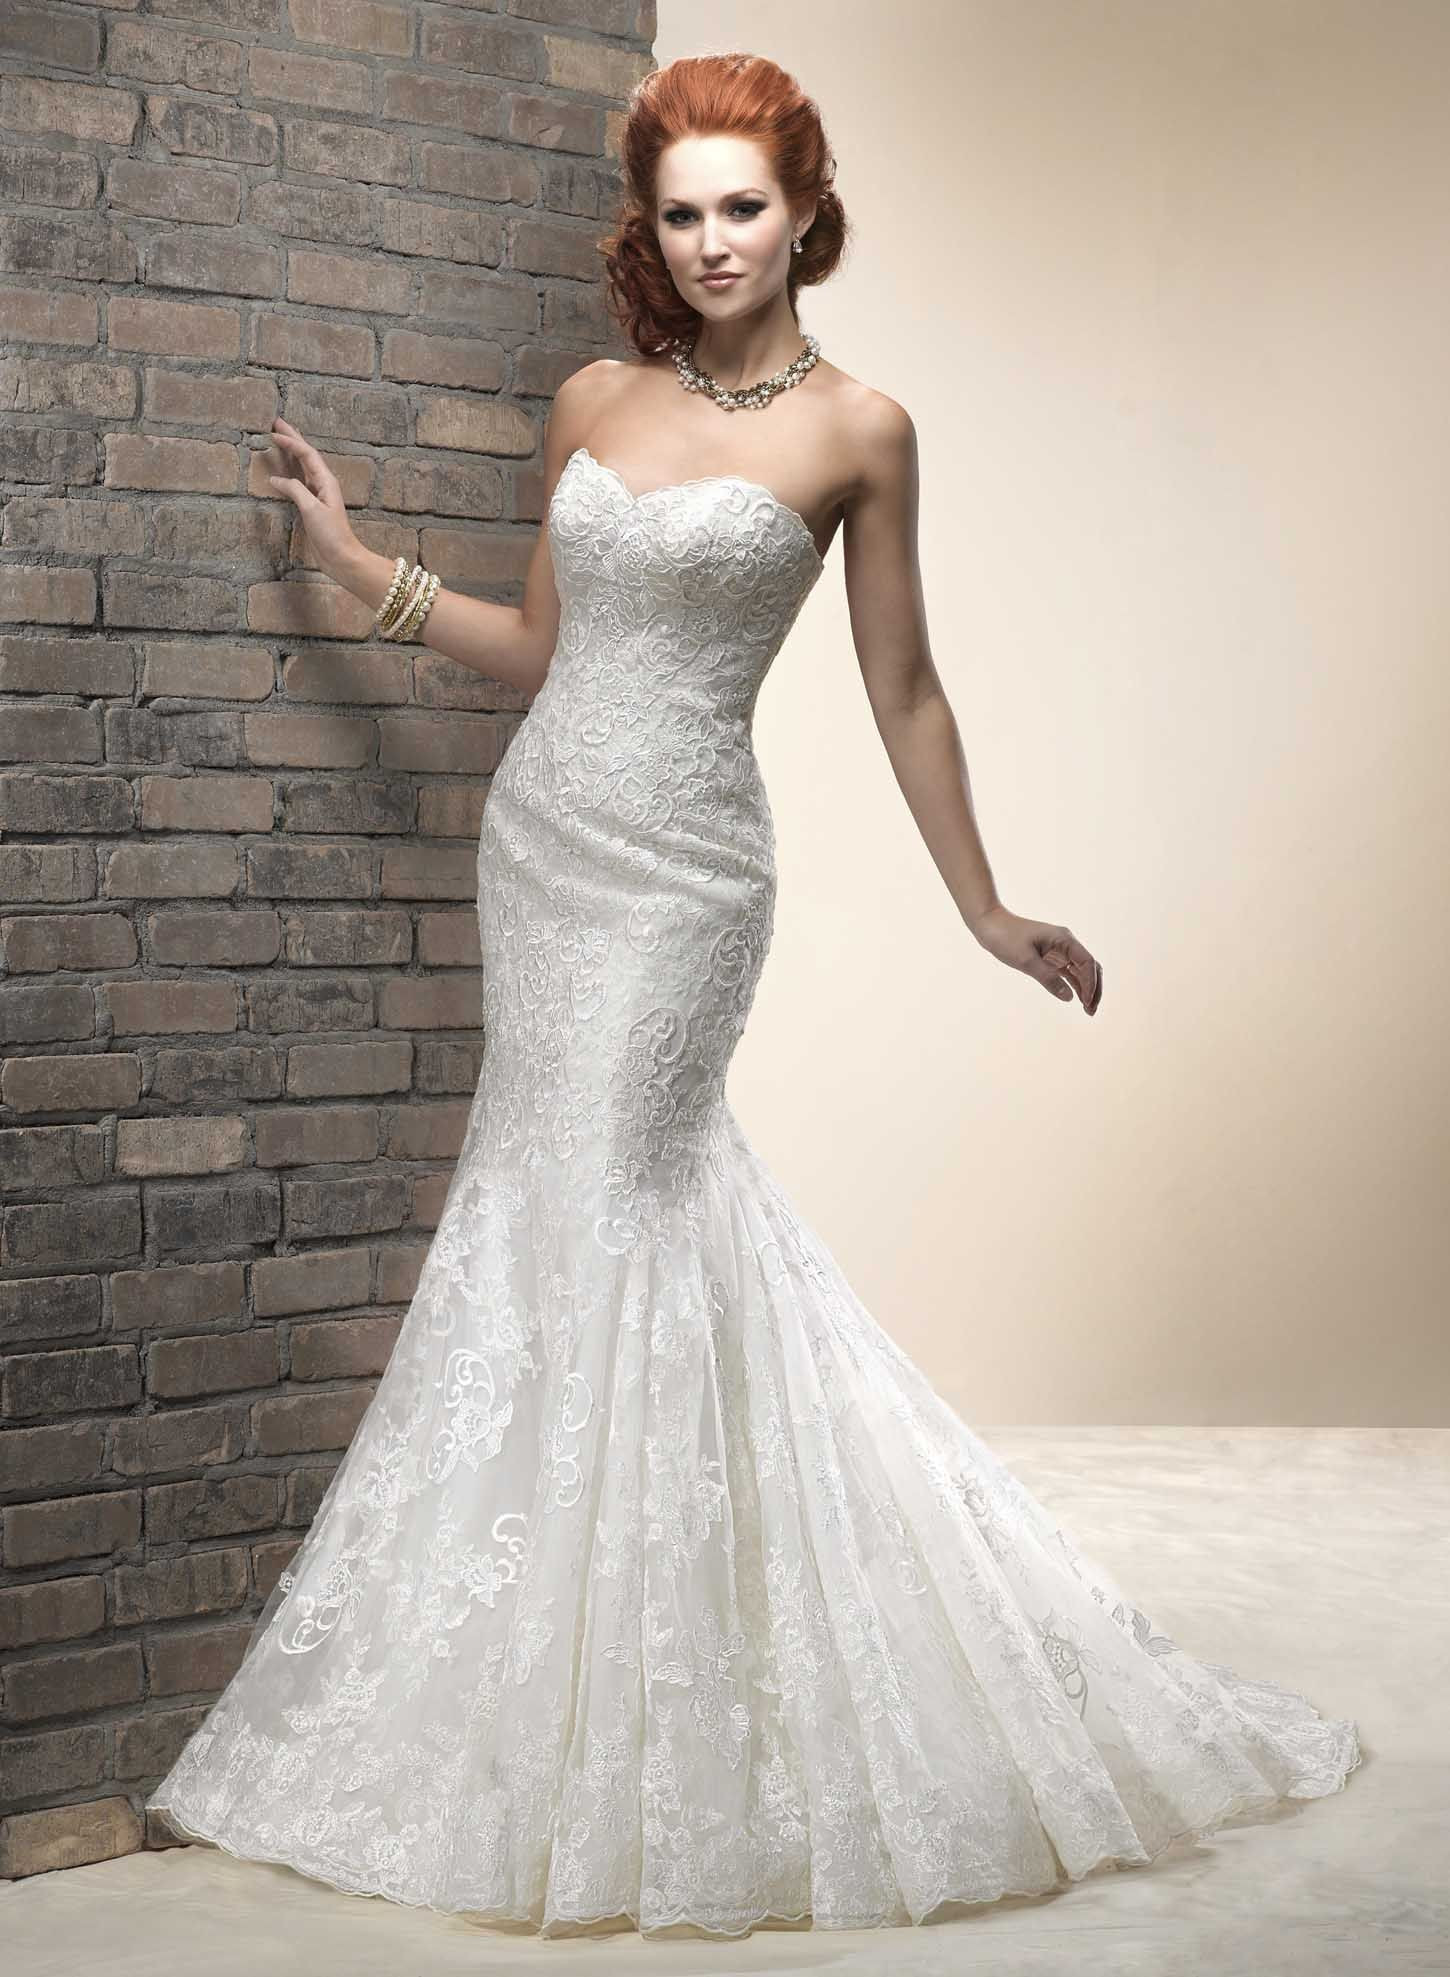 Lace Sweetheart Wedding Dress
 Show Your Beauty in Lace Wedding Dresses on Wedding